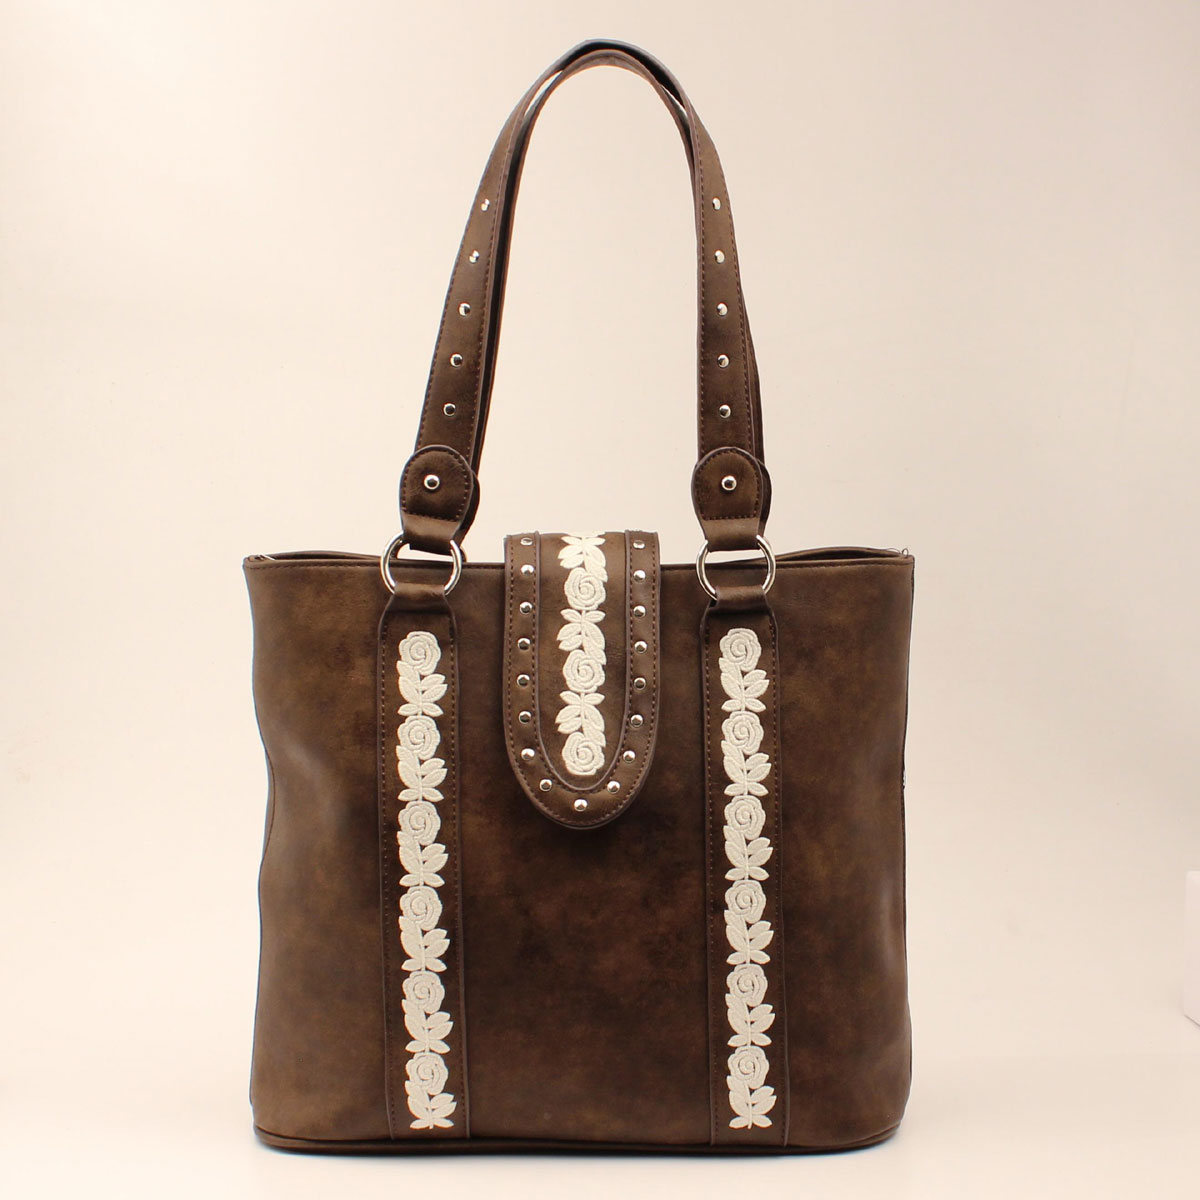 Dhb1080 Dark Brown With White Floral Embroidery Handbag